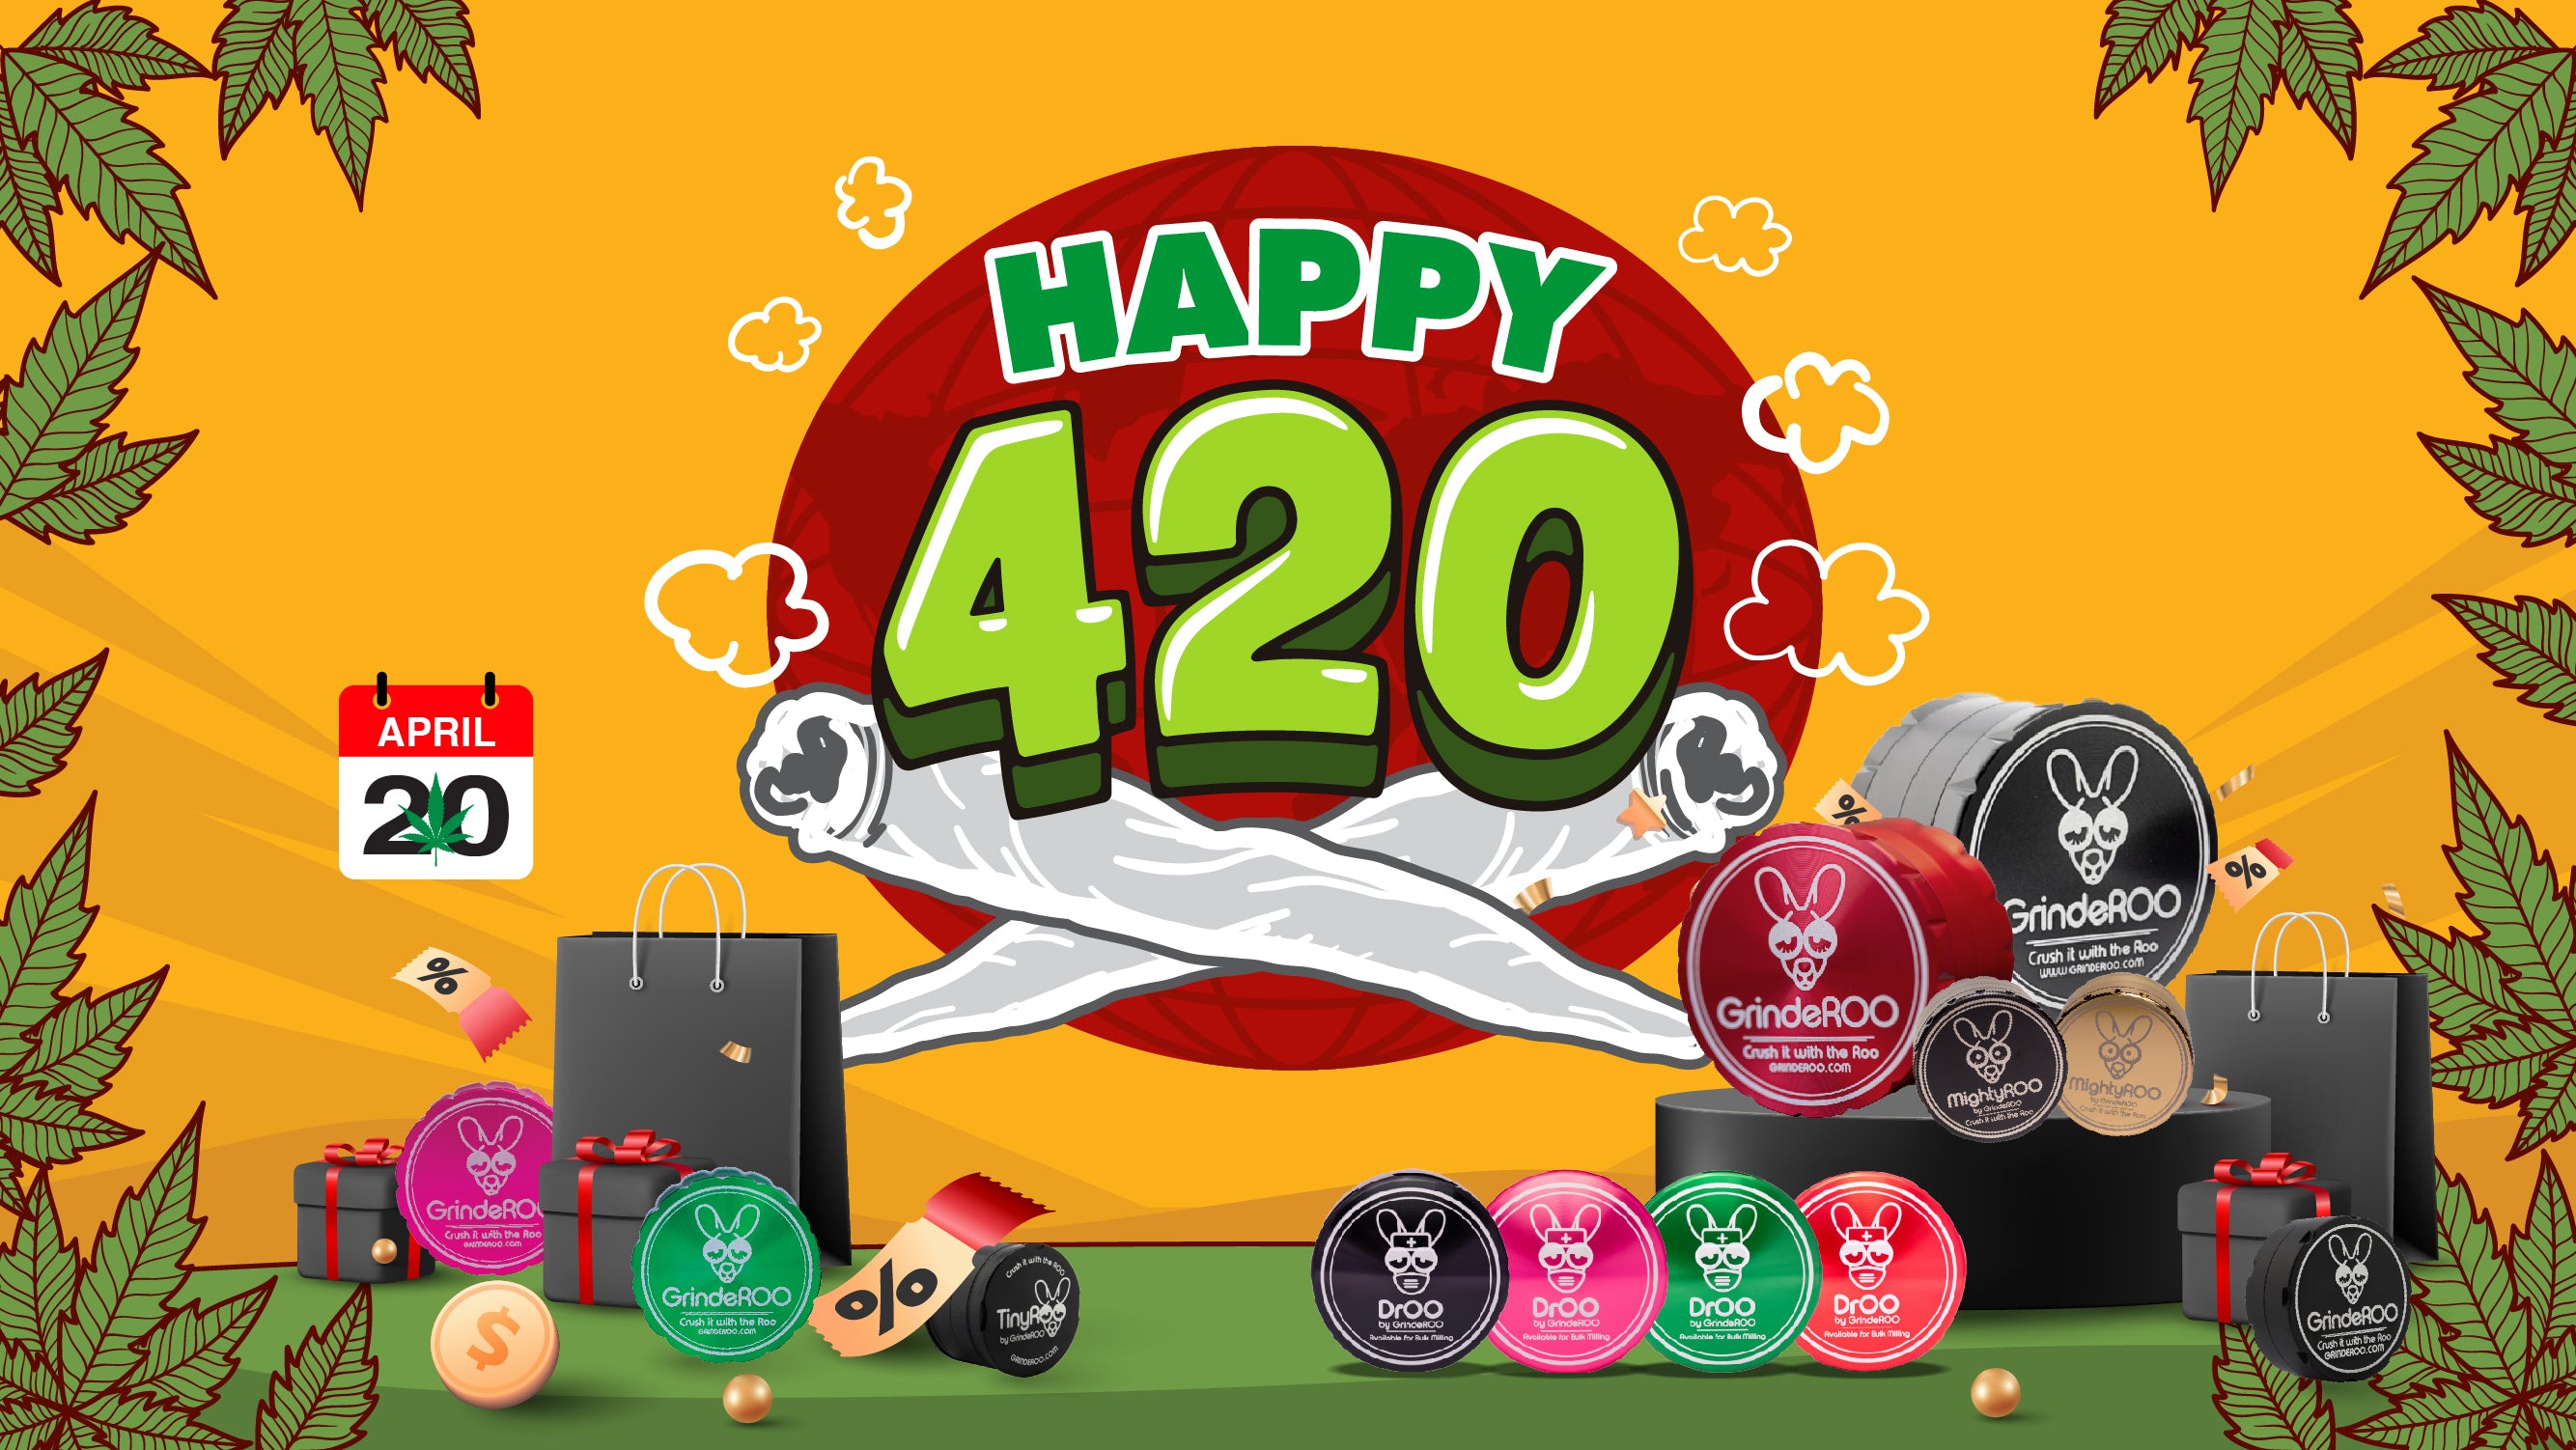 420 Sale Alert: New MightyRoo and DRoo Herb Grinders Back in Stock!